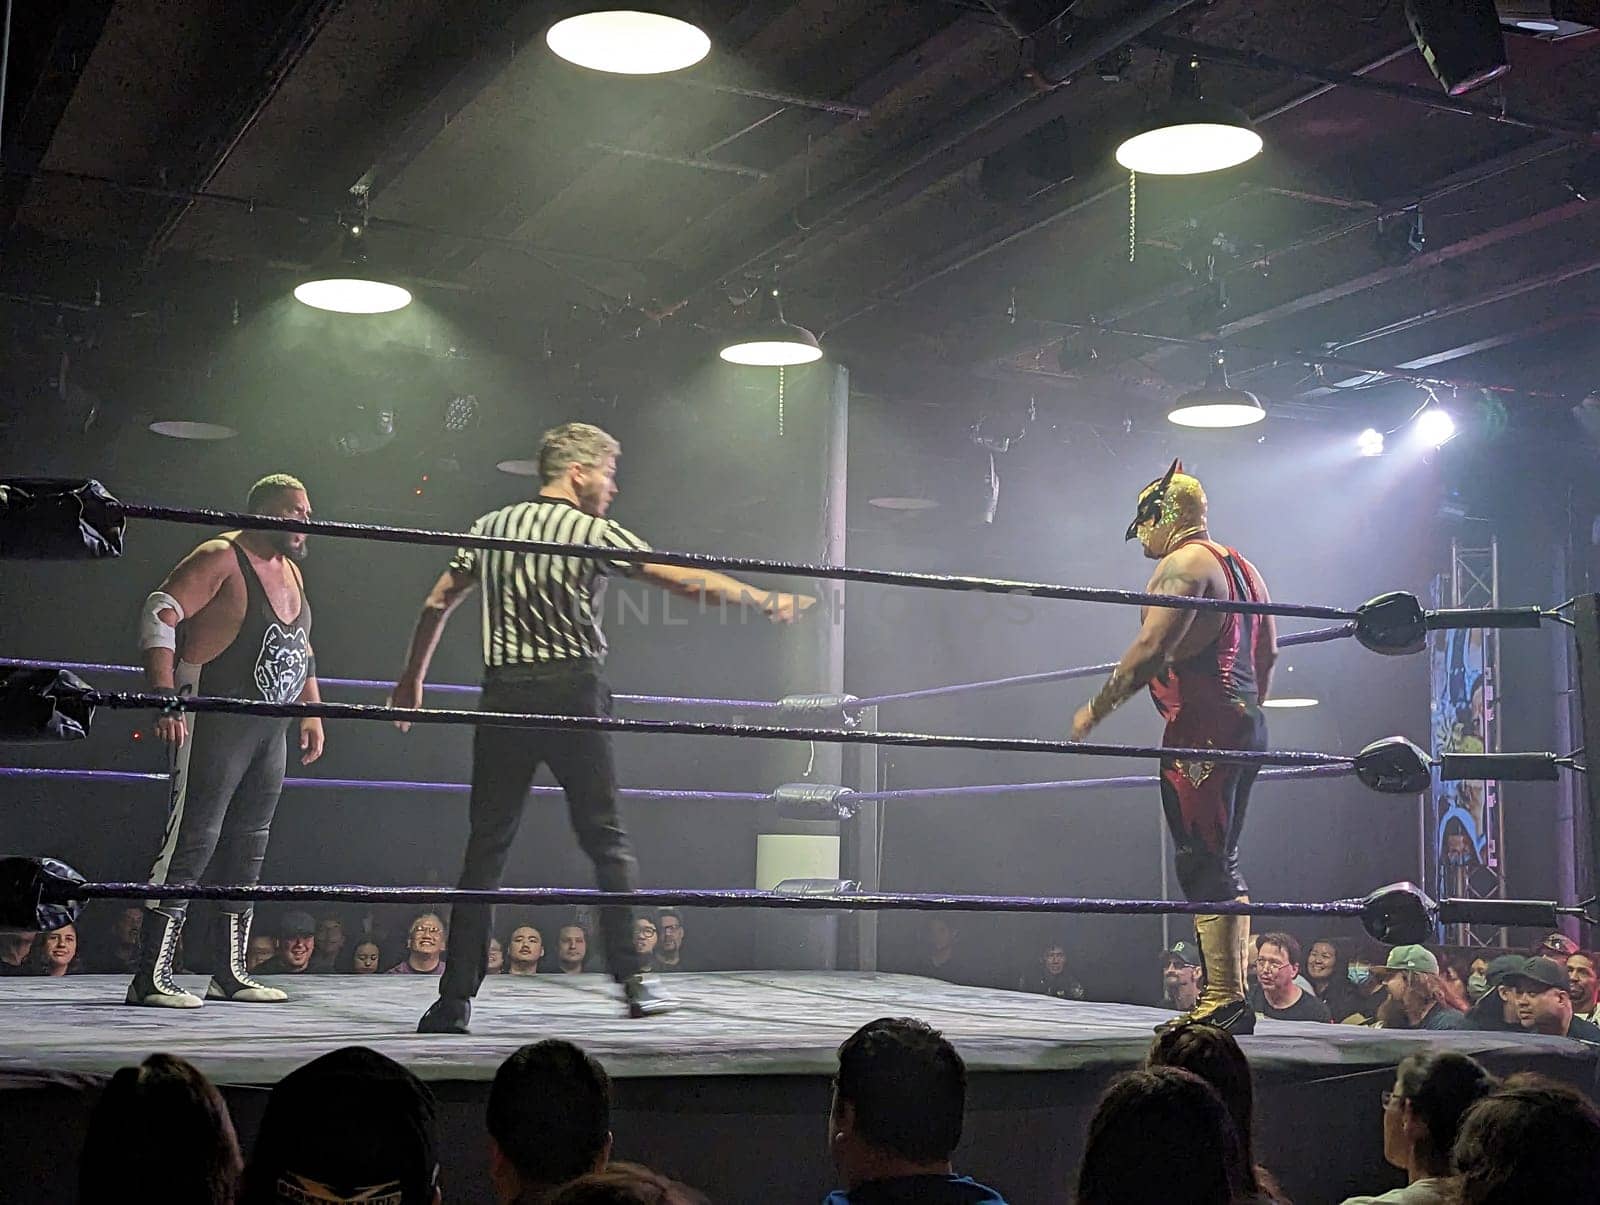 Honolulu, HI - December 22, 2022: Steve Michaels 'The Chicago Bearhug' (left) and El Guerrero Cuervo (right) battle it out in the ring at Uce Wrestling Anniversary.  It was an exciting match that will be remembered for years to come.